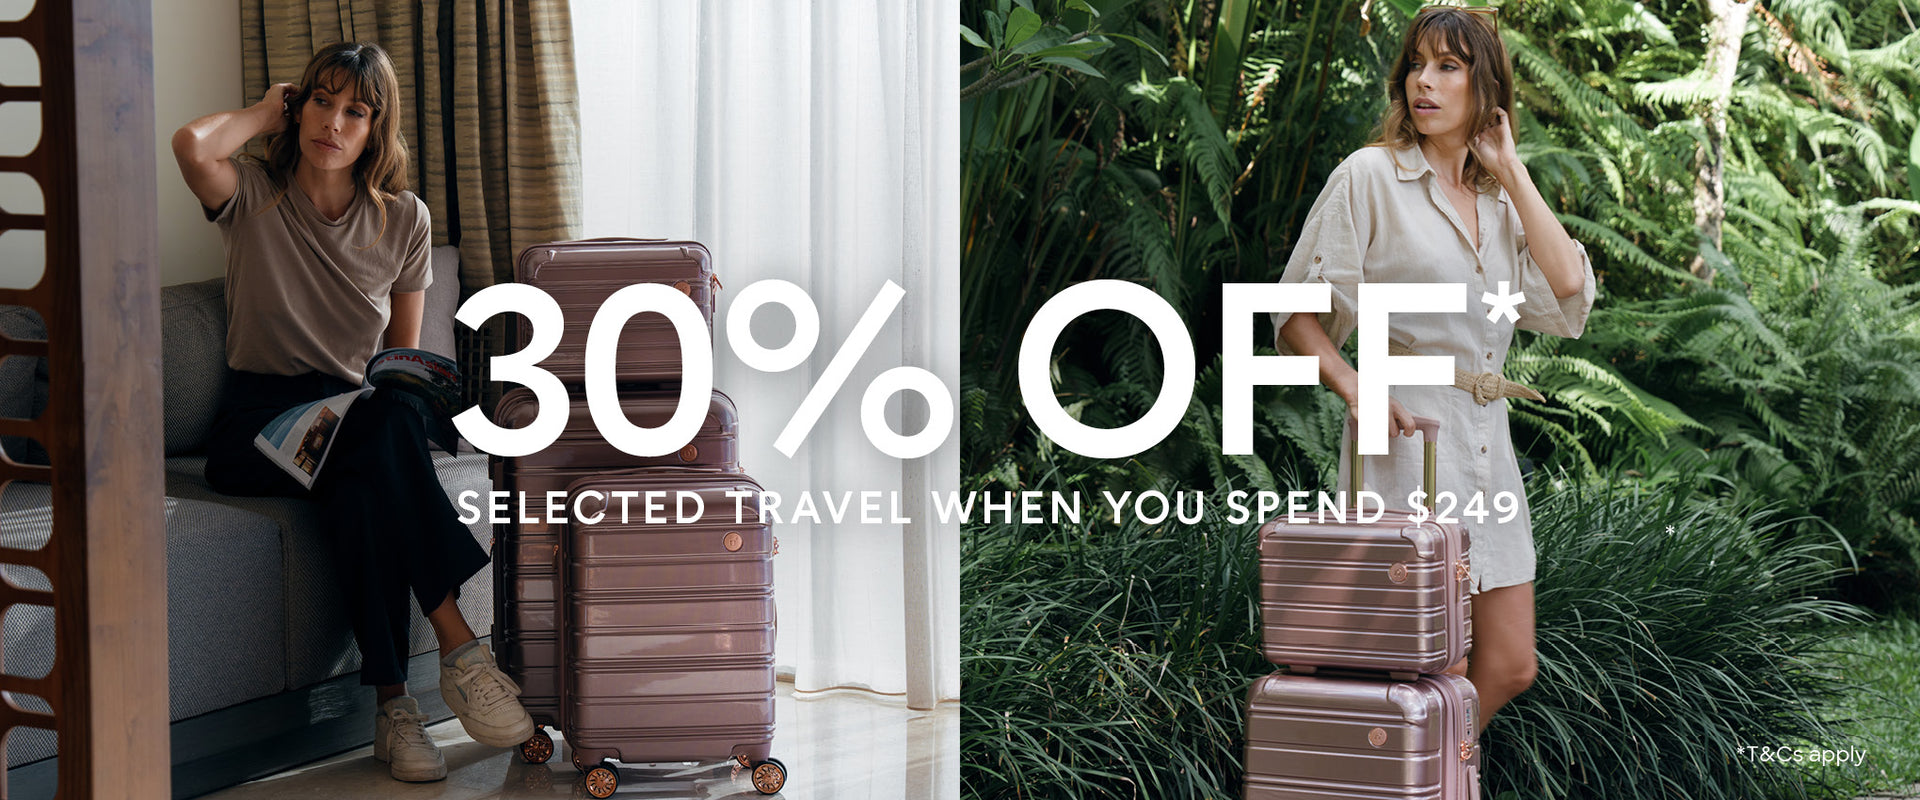 Spend $249 and Save 30% on Travel